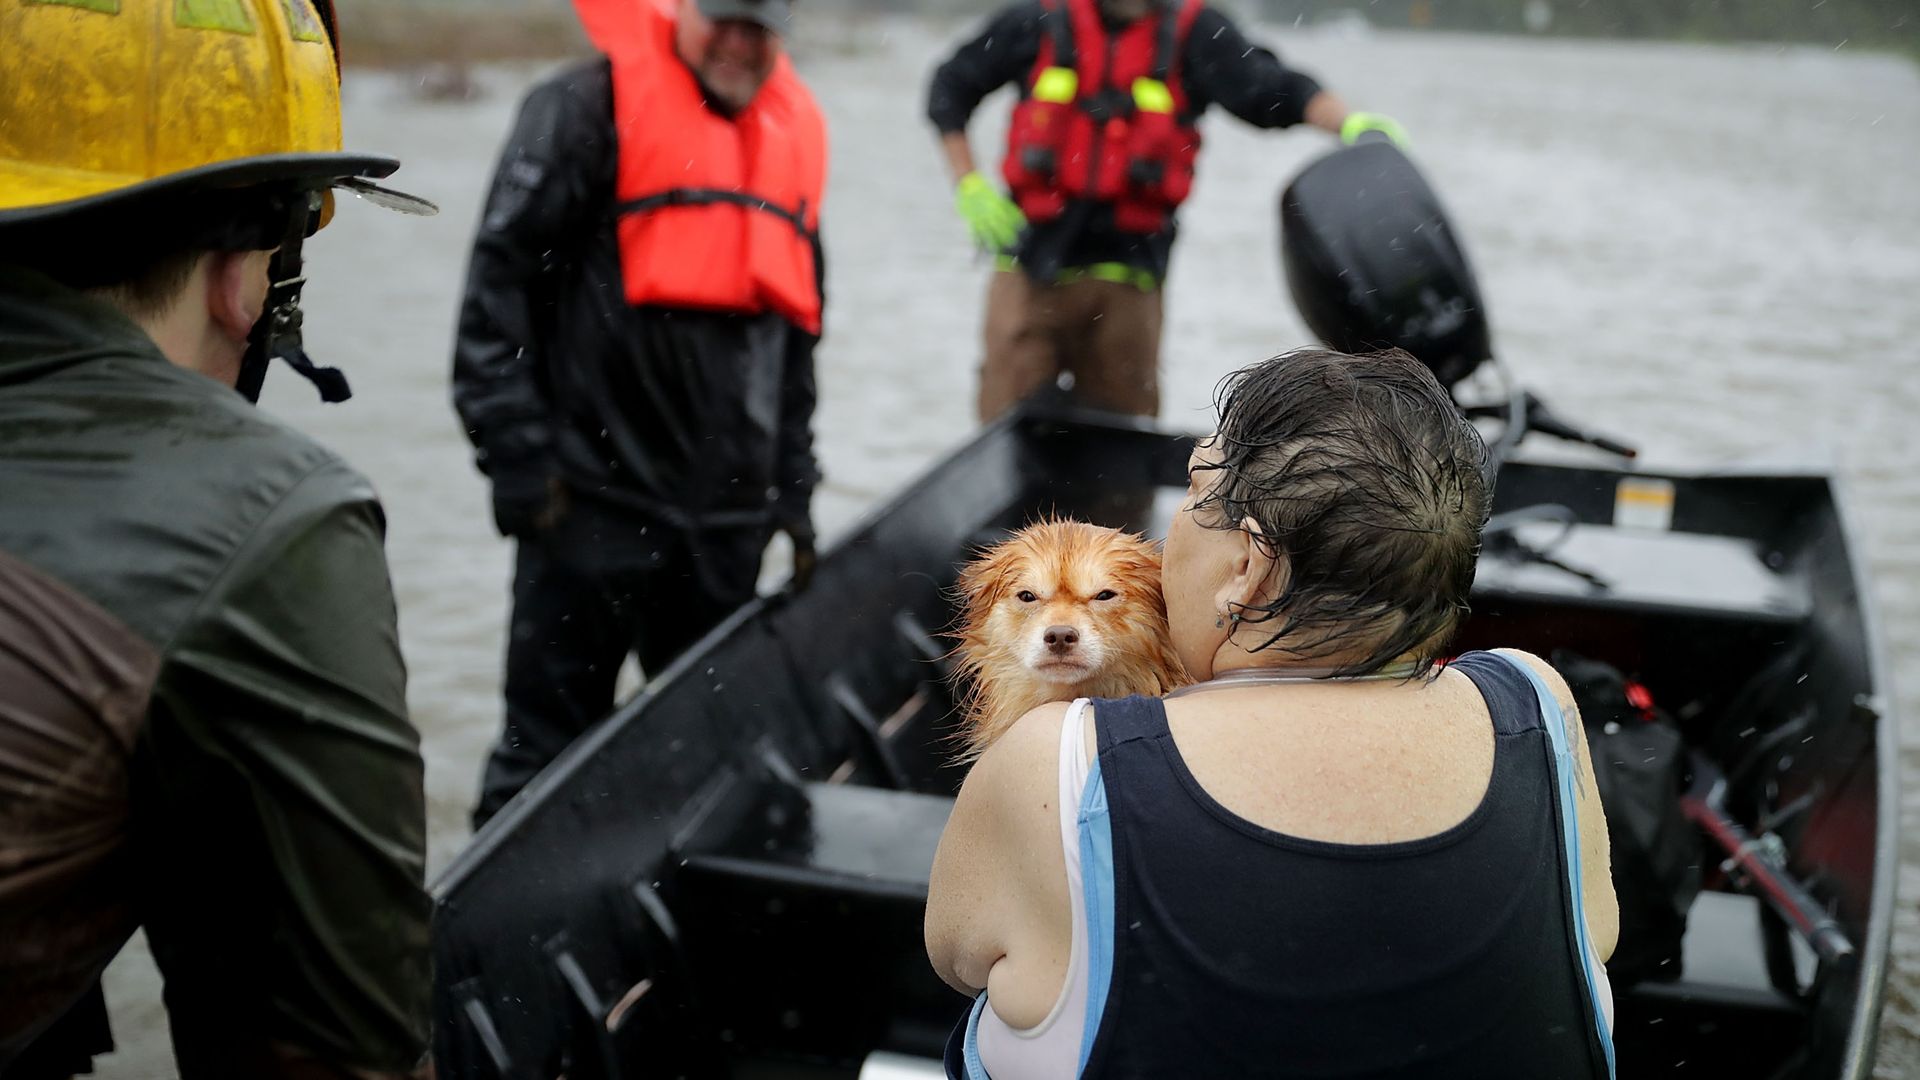 Rescue workers from use a boat to rescue a woman and her dog from their flooded home during Hurricane Florence on September 14, 2018 in James City, North Carolina.